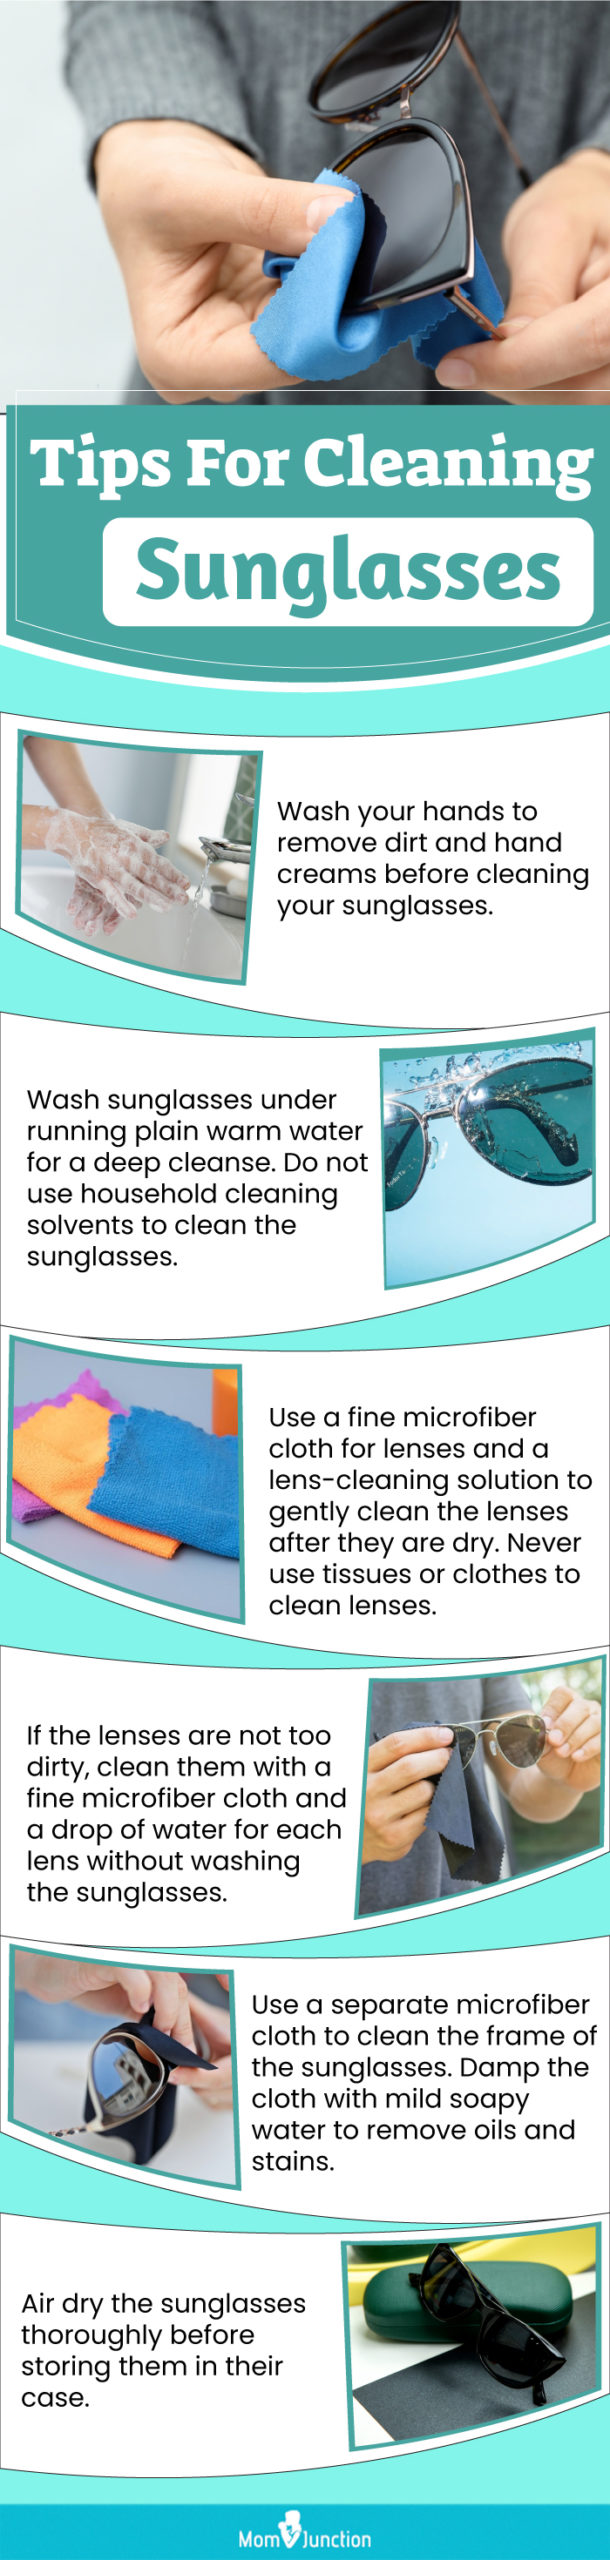 Tips For Cleaning Sunglasses (infographic)